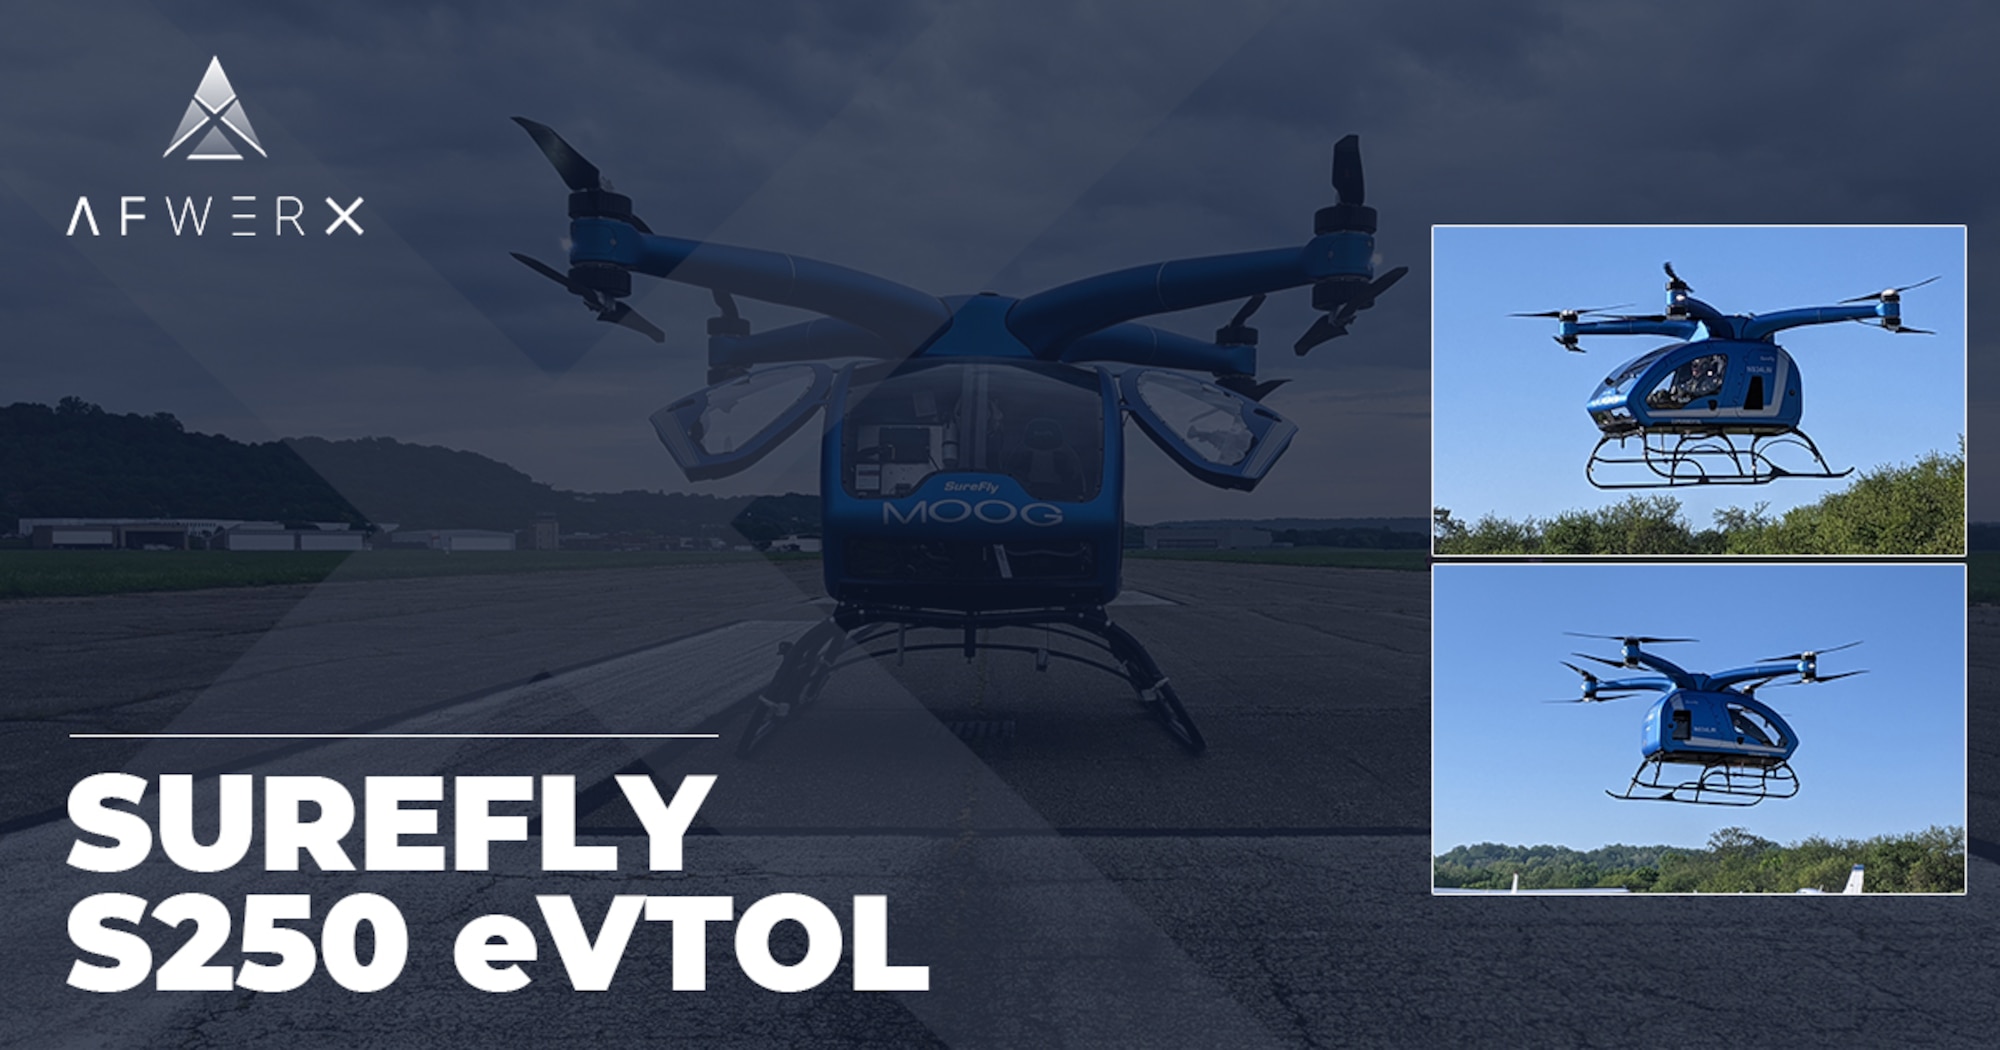 AFWERX Agility Prime Partner, Moog Aircraft Group, has created a prototype electric vertical takeoff and landing vehicle (eVTOL), the SureFly S250. (Courtesy graphic/AFWERX)